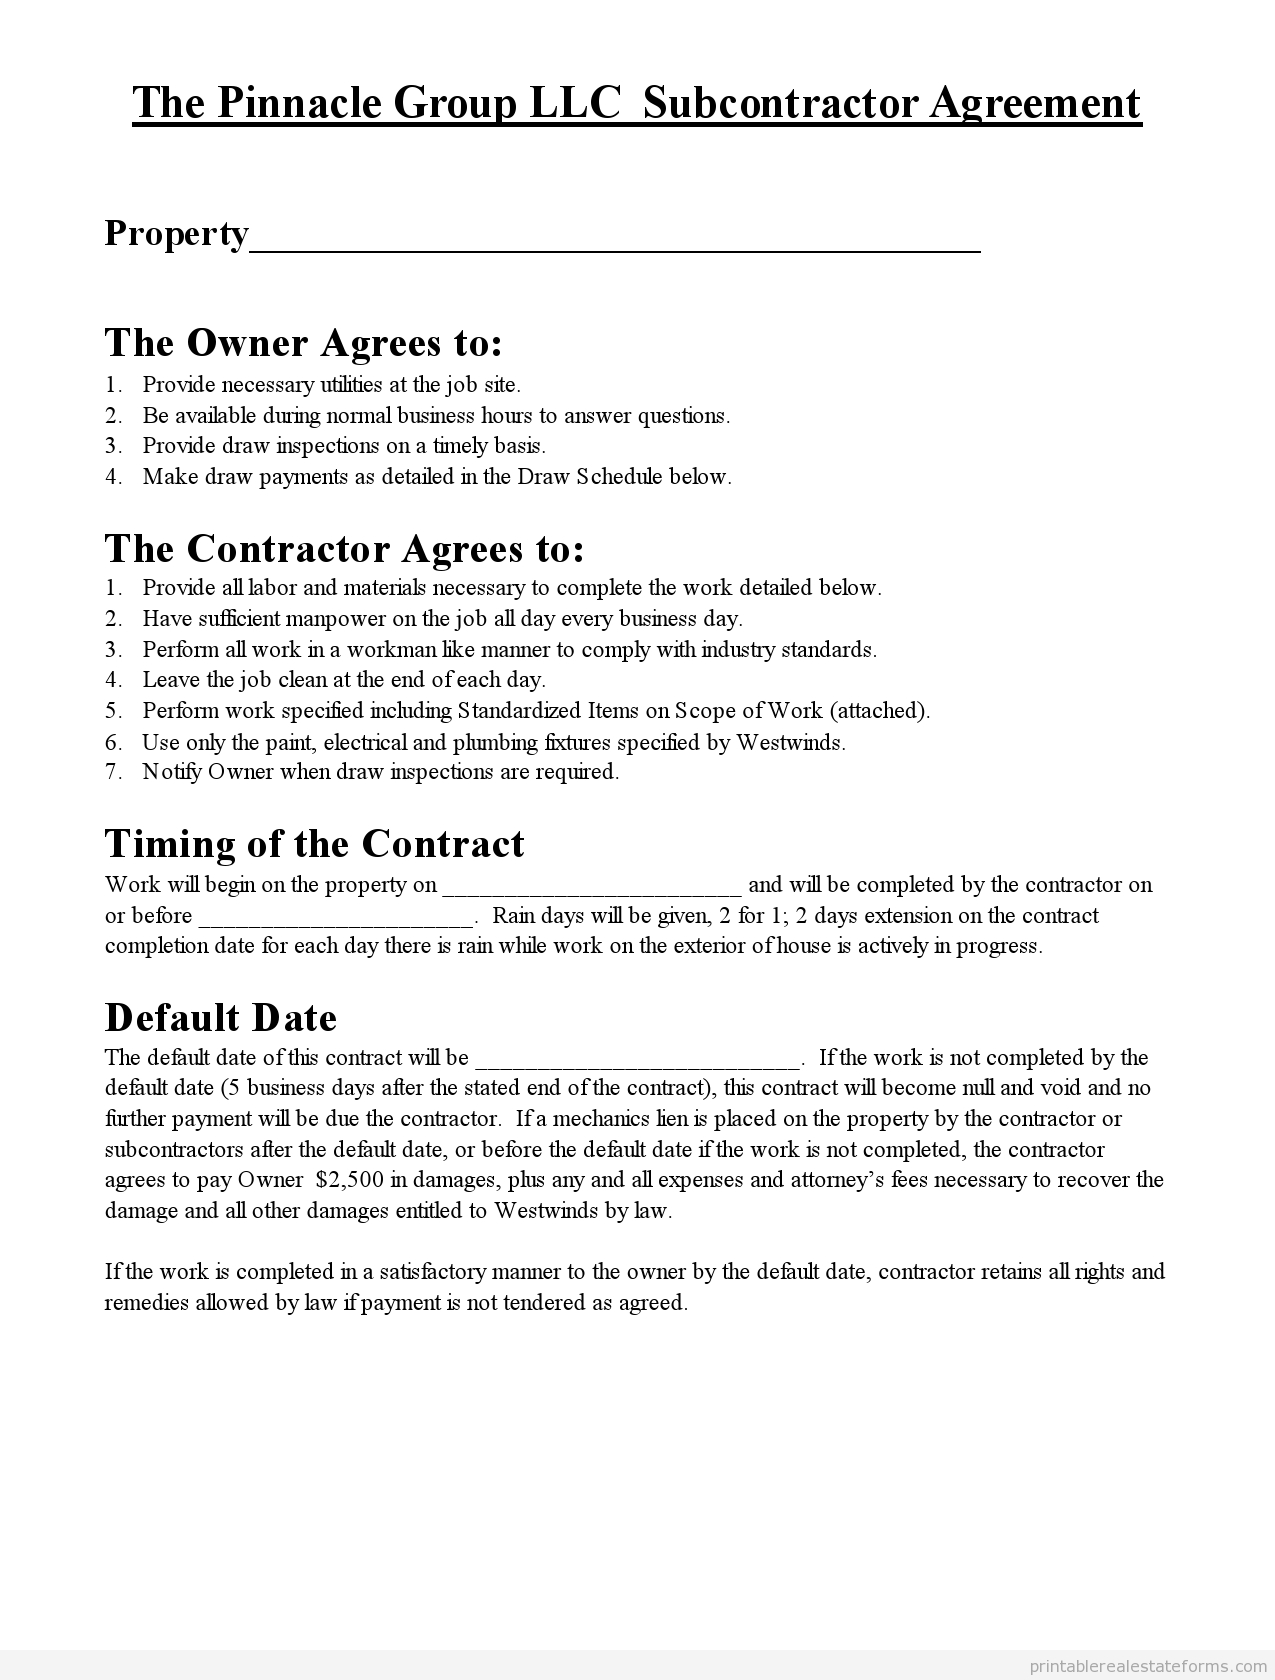 Free Printable Subcontractor Agreement Form | Printable Real Estate - Free Printable Subcontractor Agreement